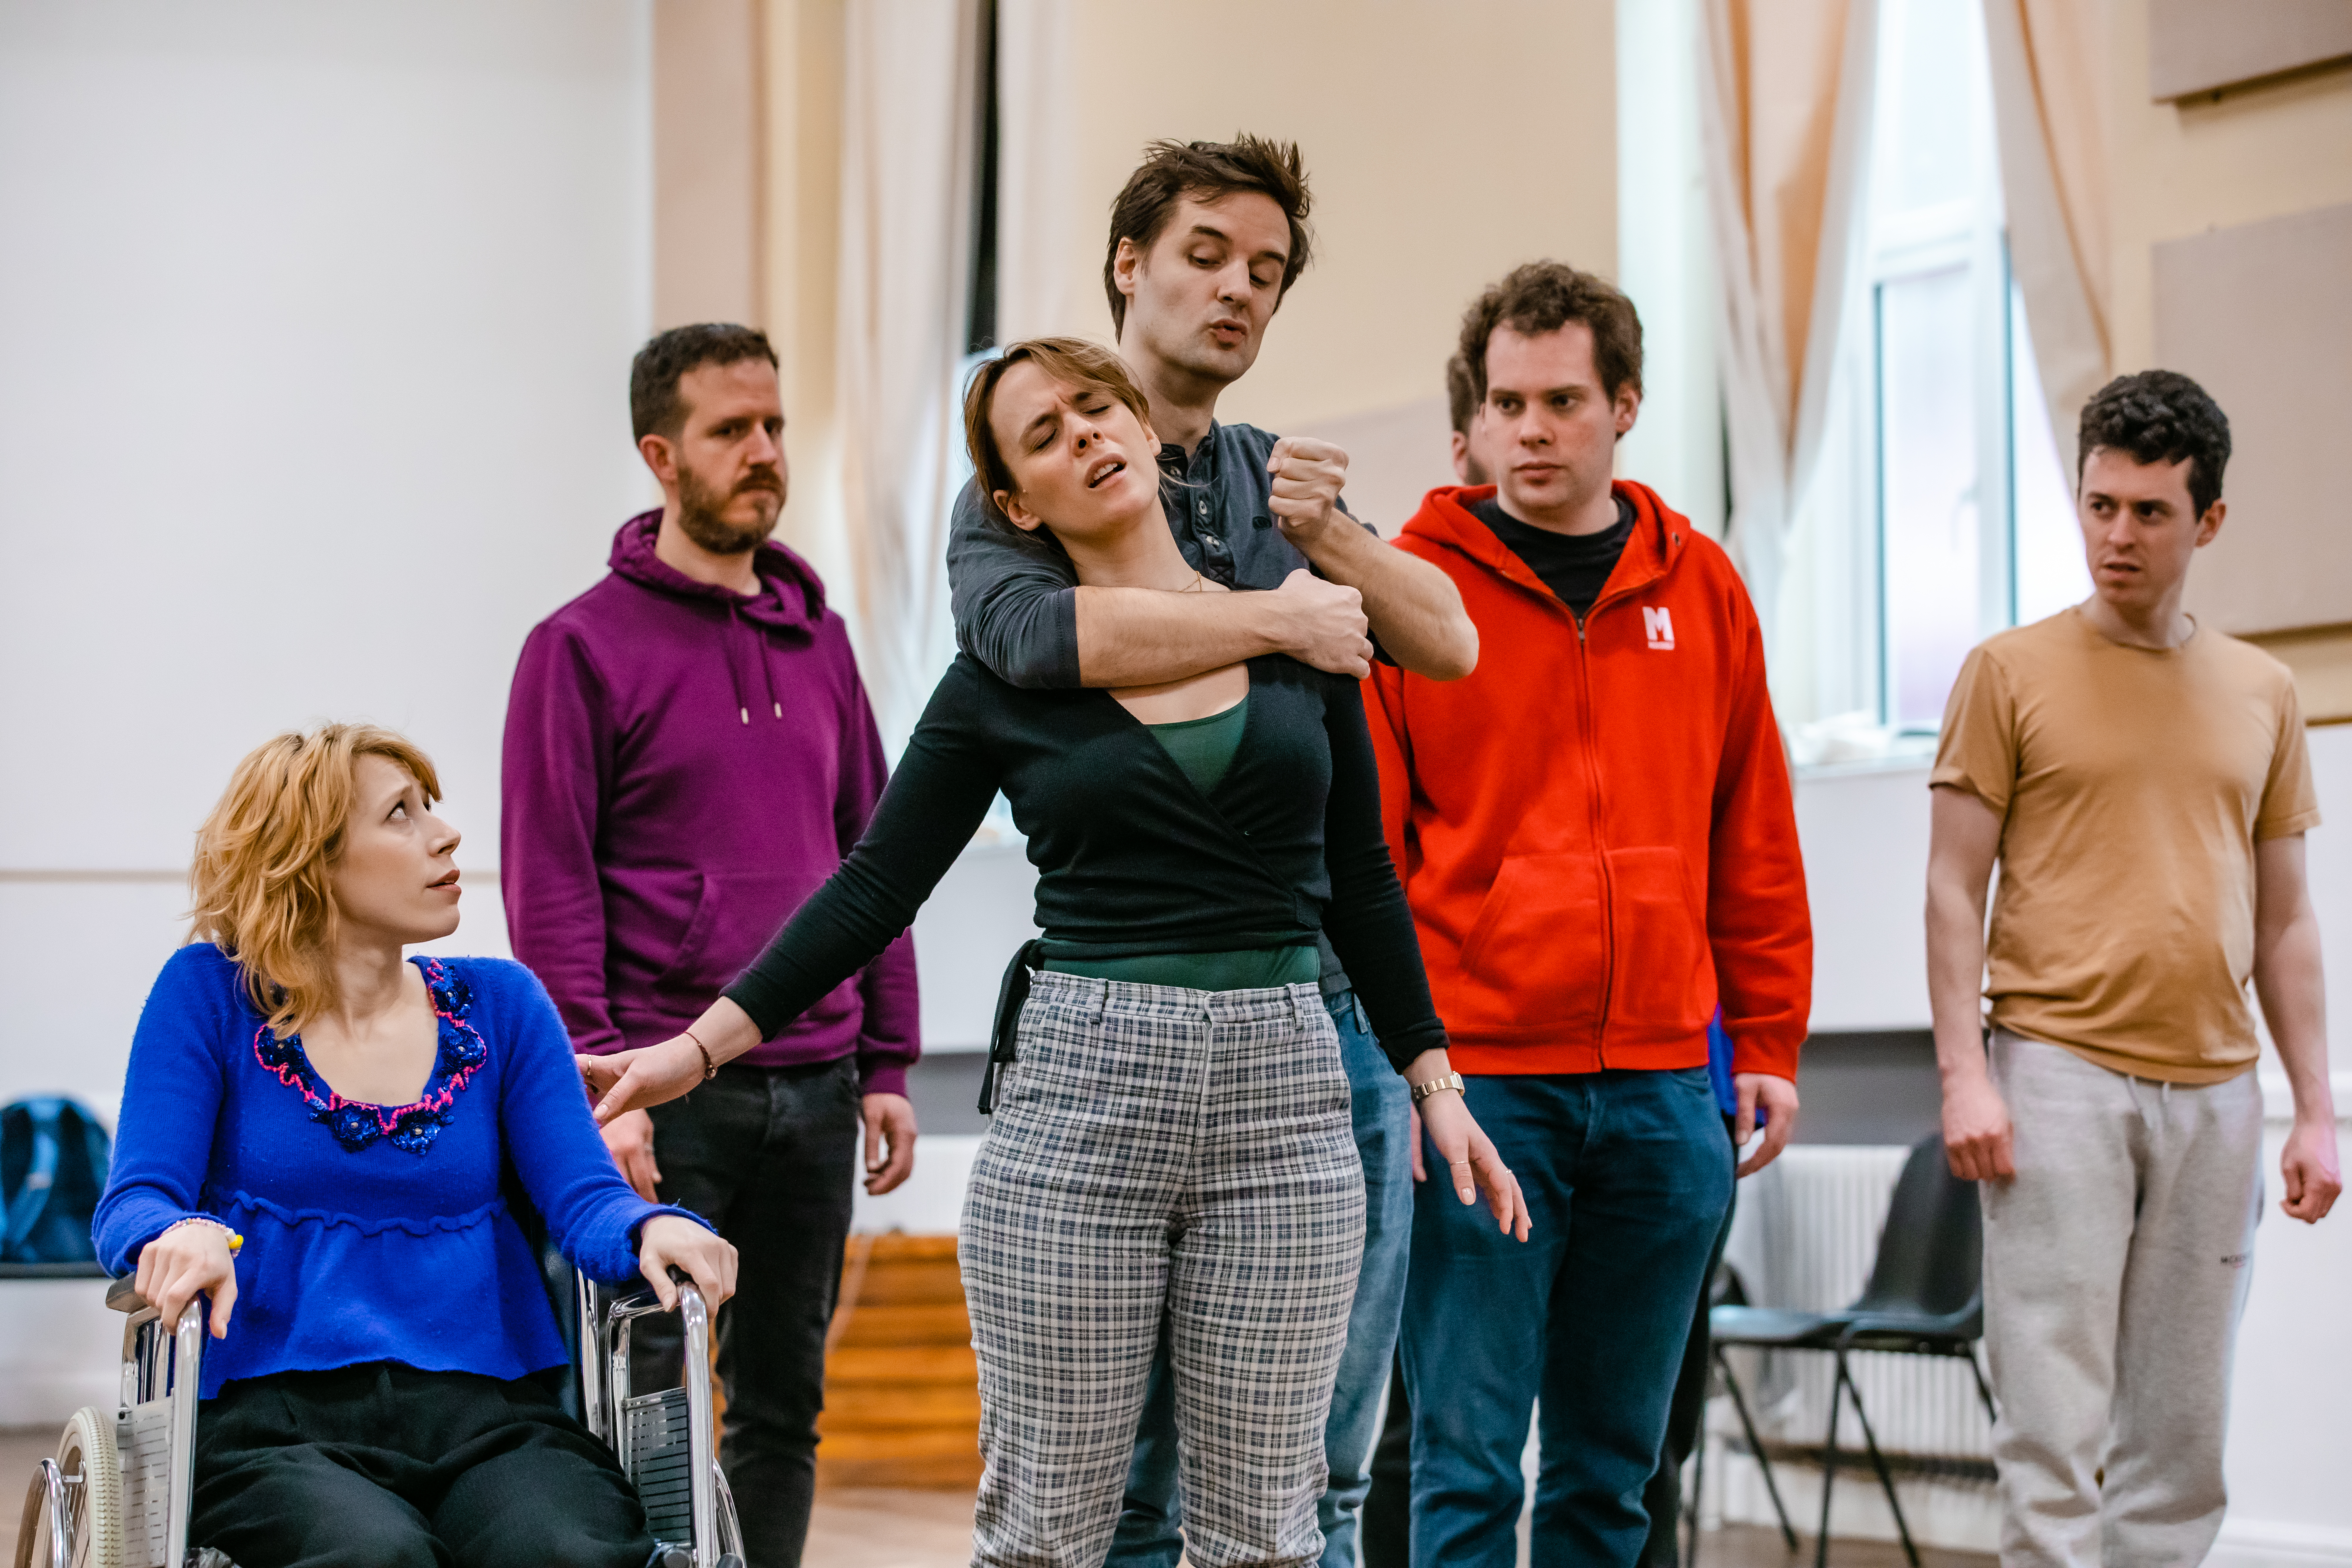 Ellie Morris, Fred Gray, Charlie Russell, Henry Shields, Harry Kershaw, and Jonathan Sayer in rehearsals for Peter Pan Goes Wrong. Photo by Danny Kaan.